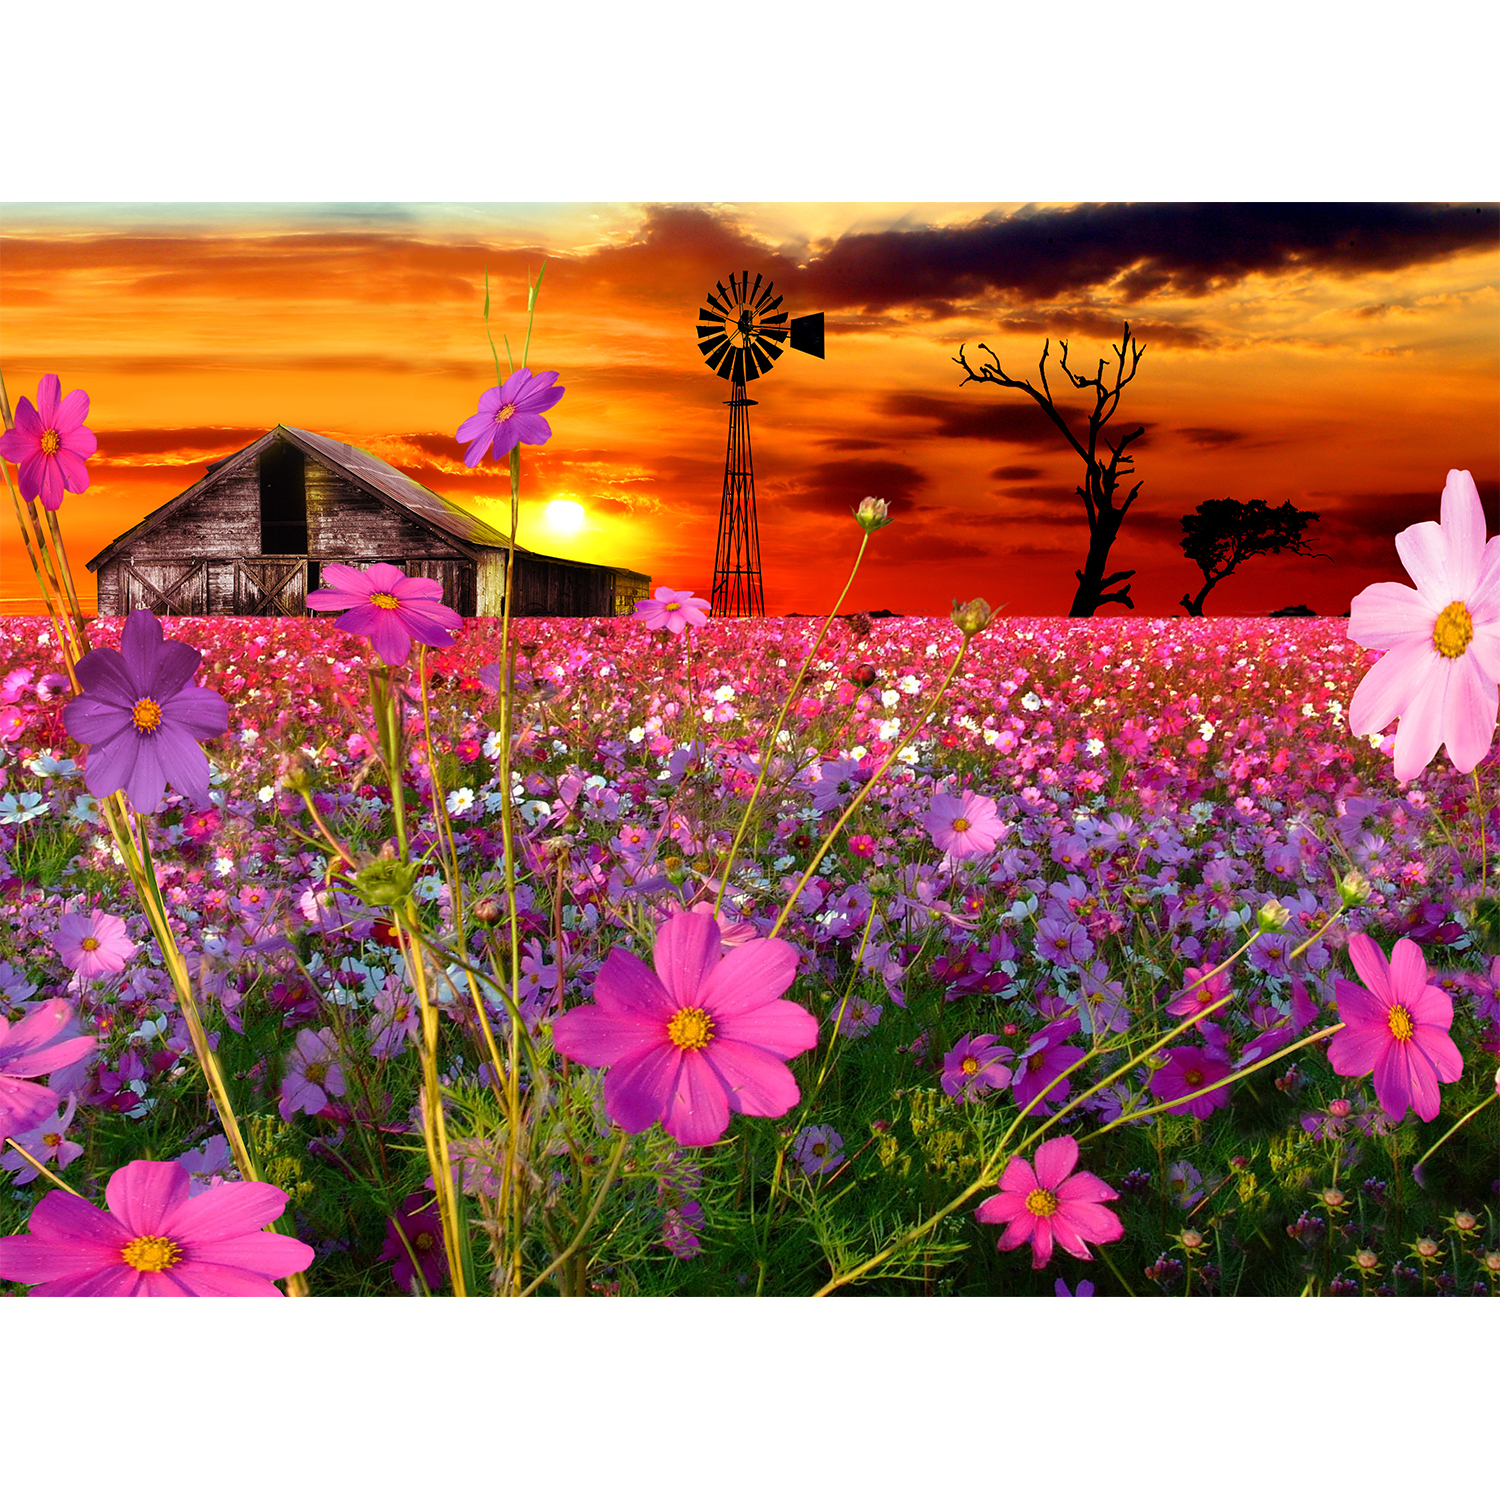 1500pc puzzle of sunset in with Cosmos, a windmill and barn